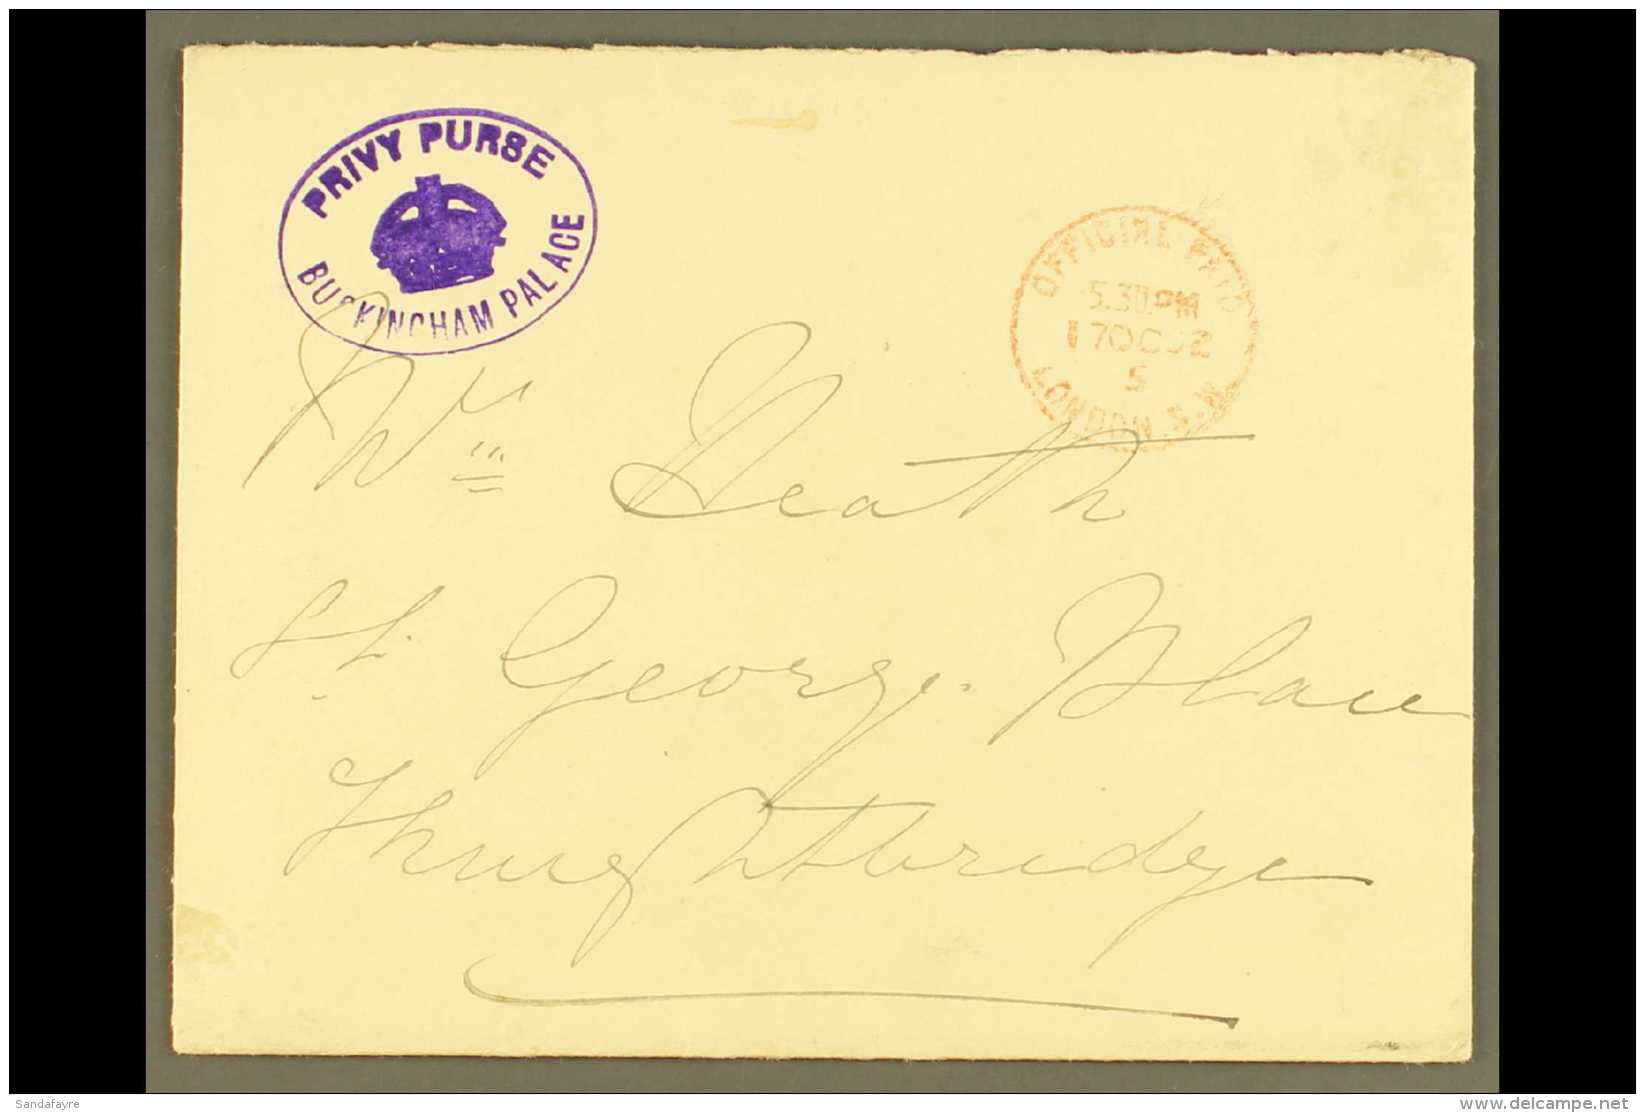 1902 PRIVY PURSE/BUCKINGHAM PALACE VIOLET CACHET ON OFFICIAL PAID ENVELOPE (Oct) Neat Envelope With Fine Red... - Ohne Zuordnung